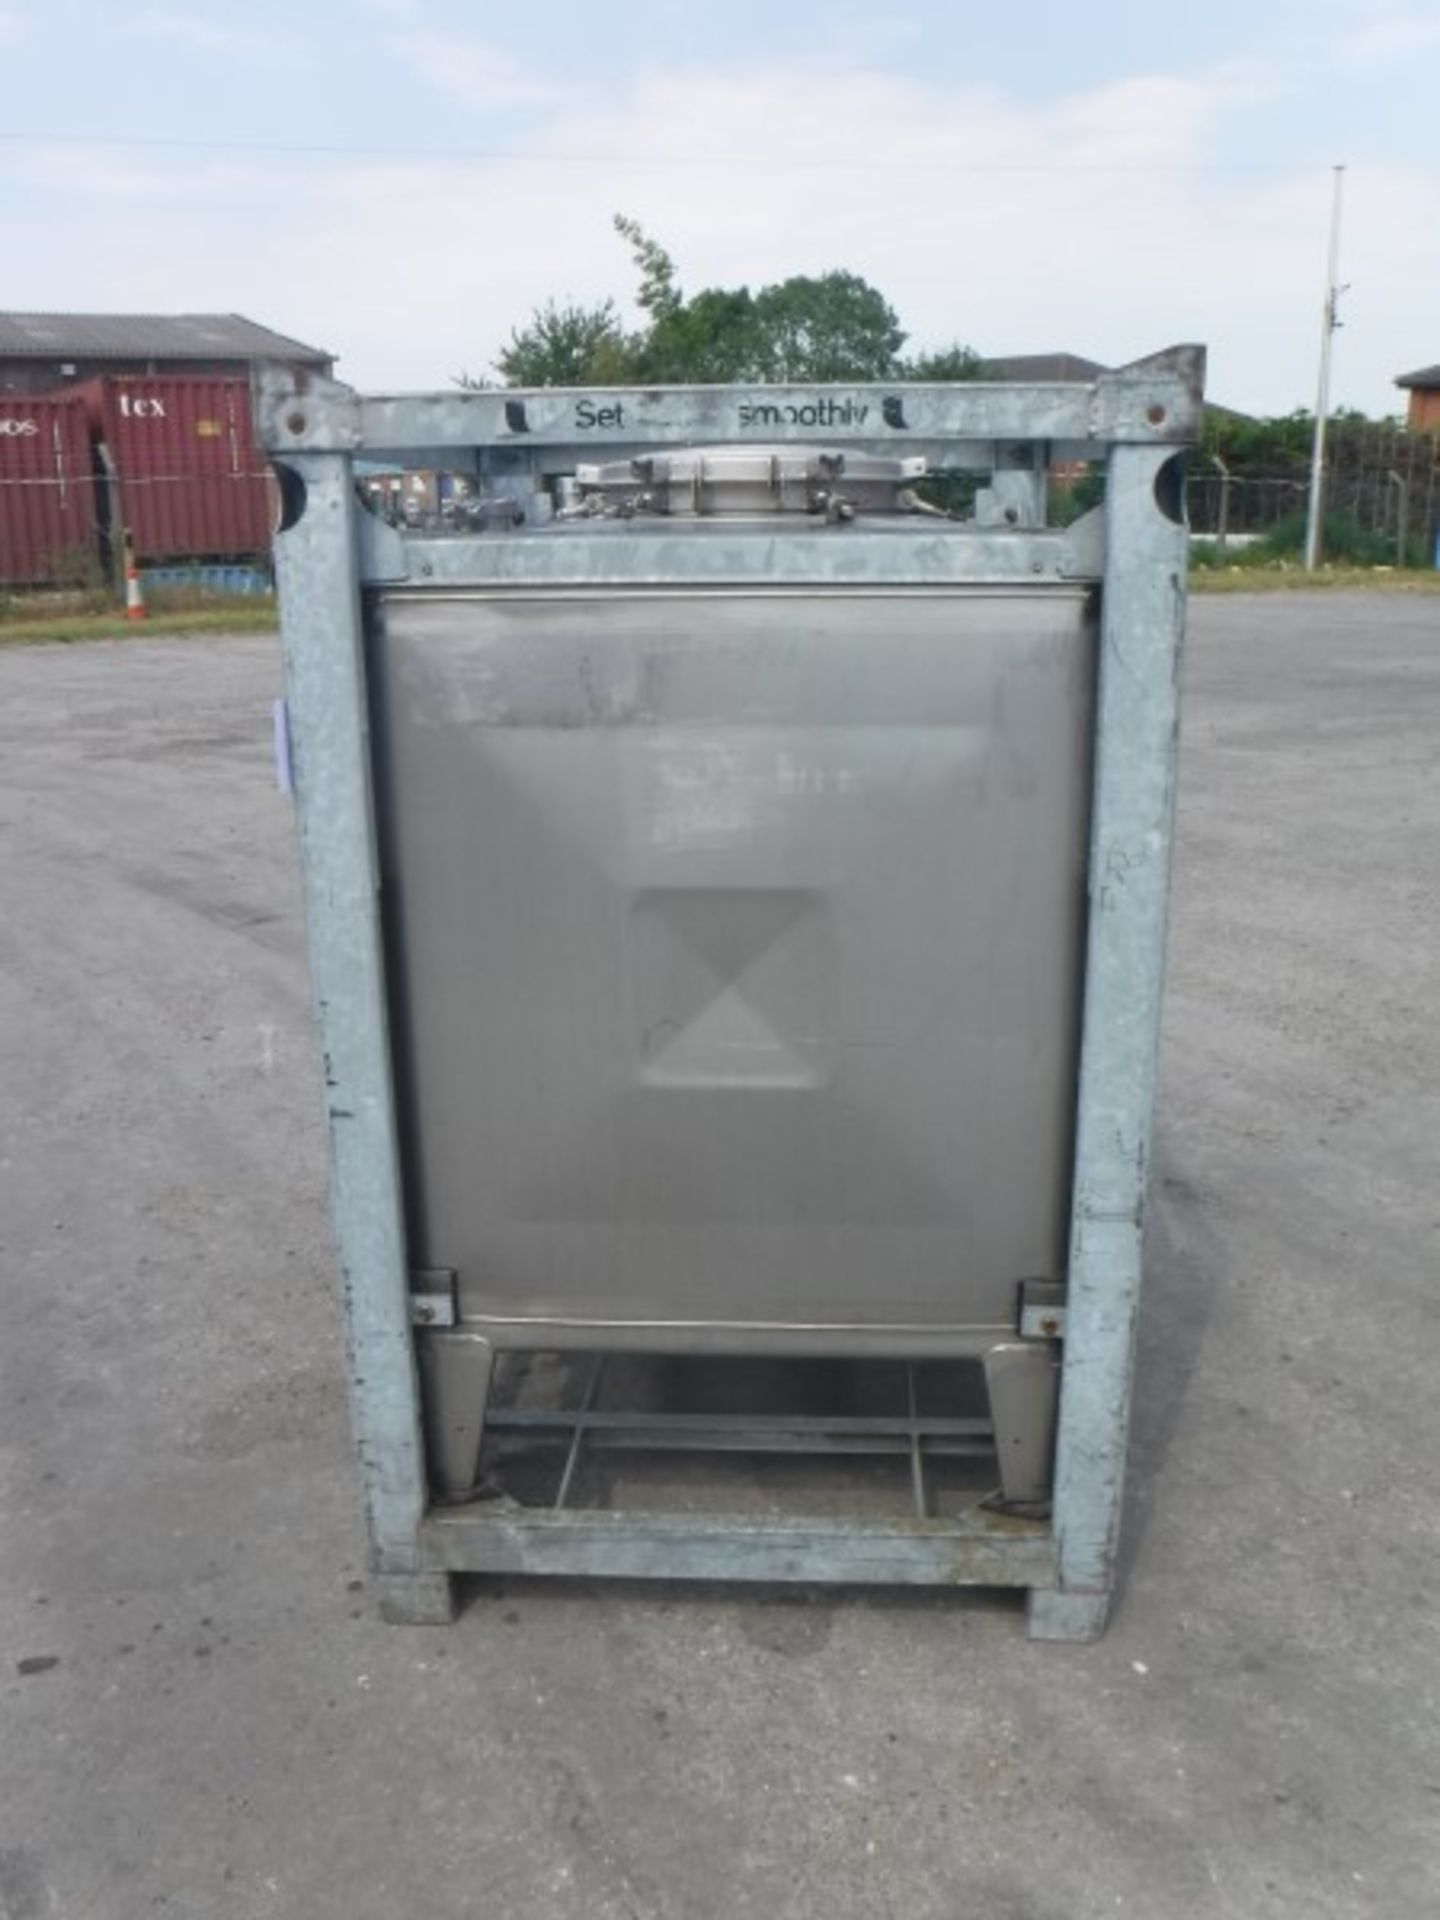 Stainless Steel IBC with Galvanised Protective Frame and Base (Frame can be removed) Capacity : 1000 - Image 3 of 6